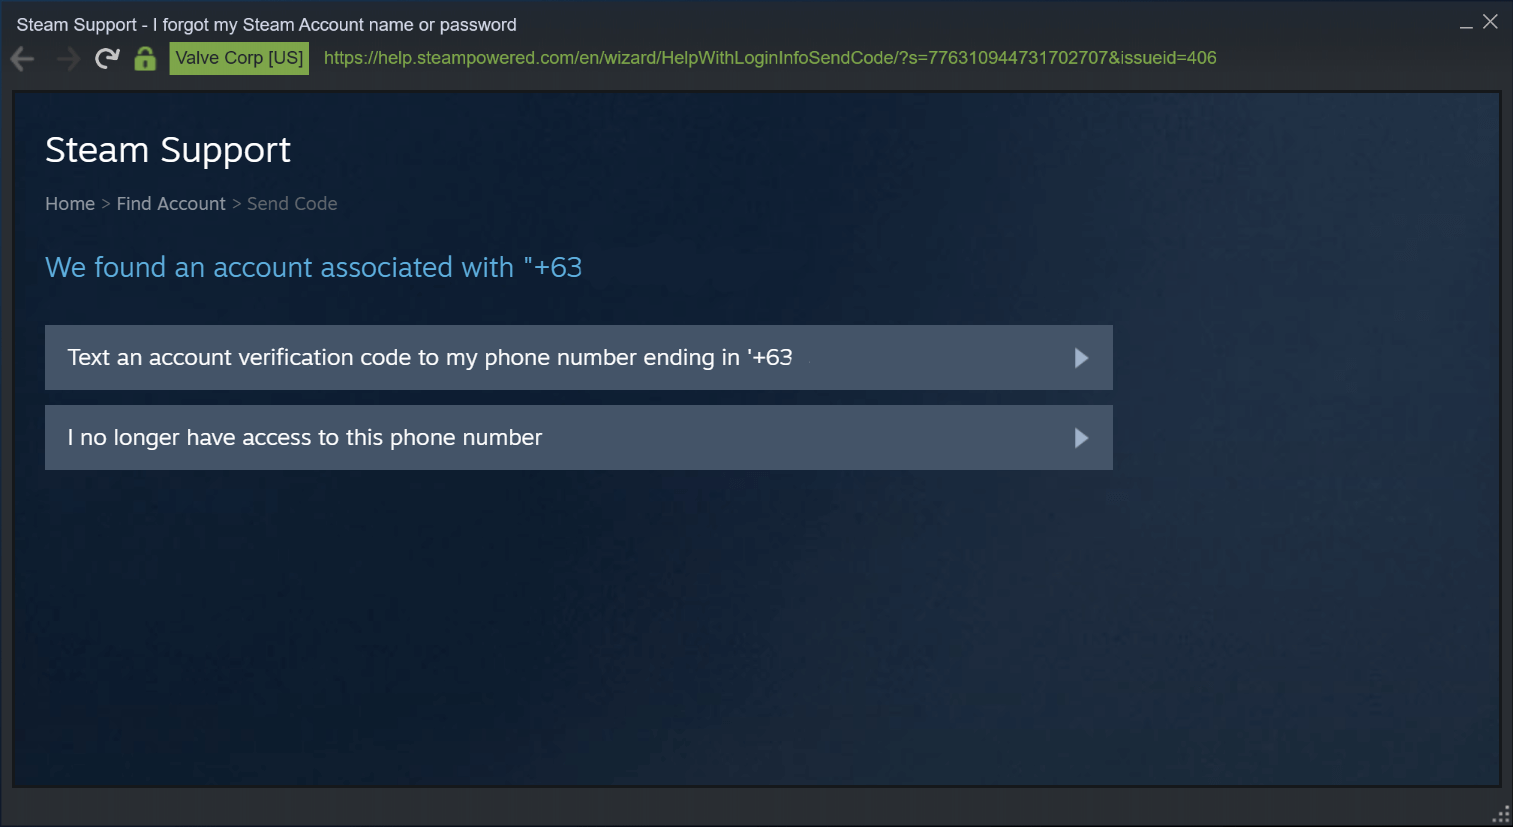 recover your steam account lost password